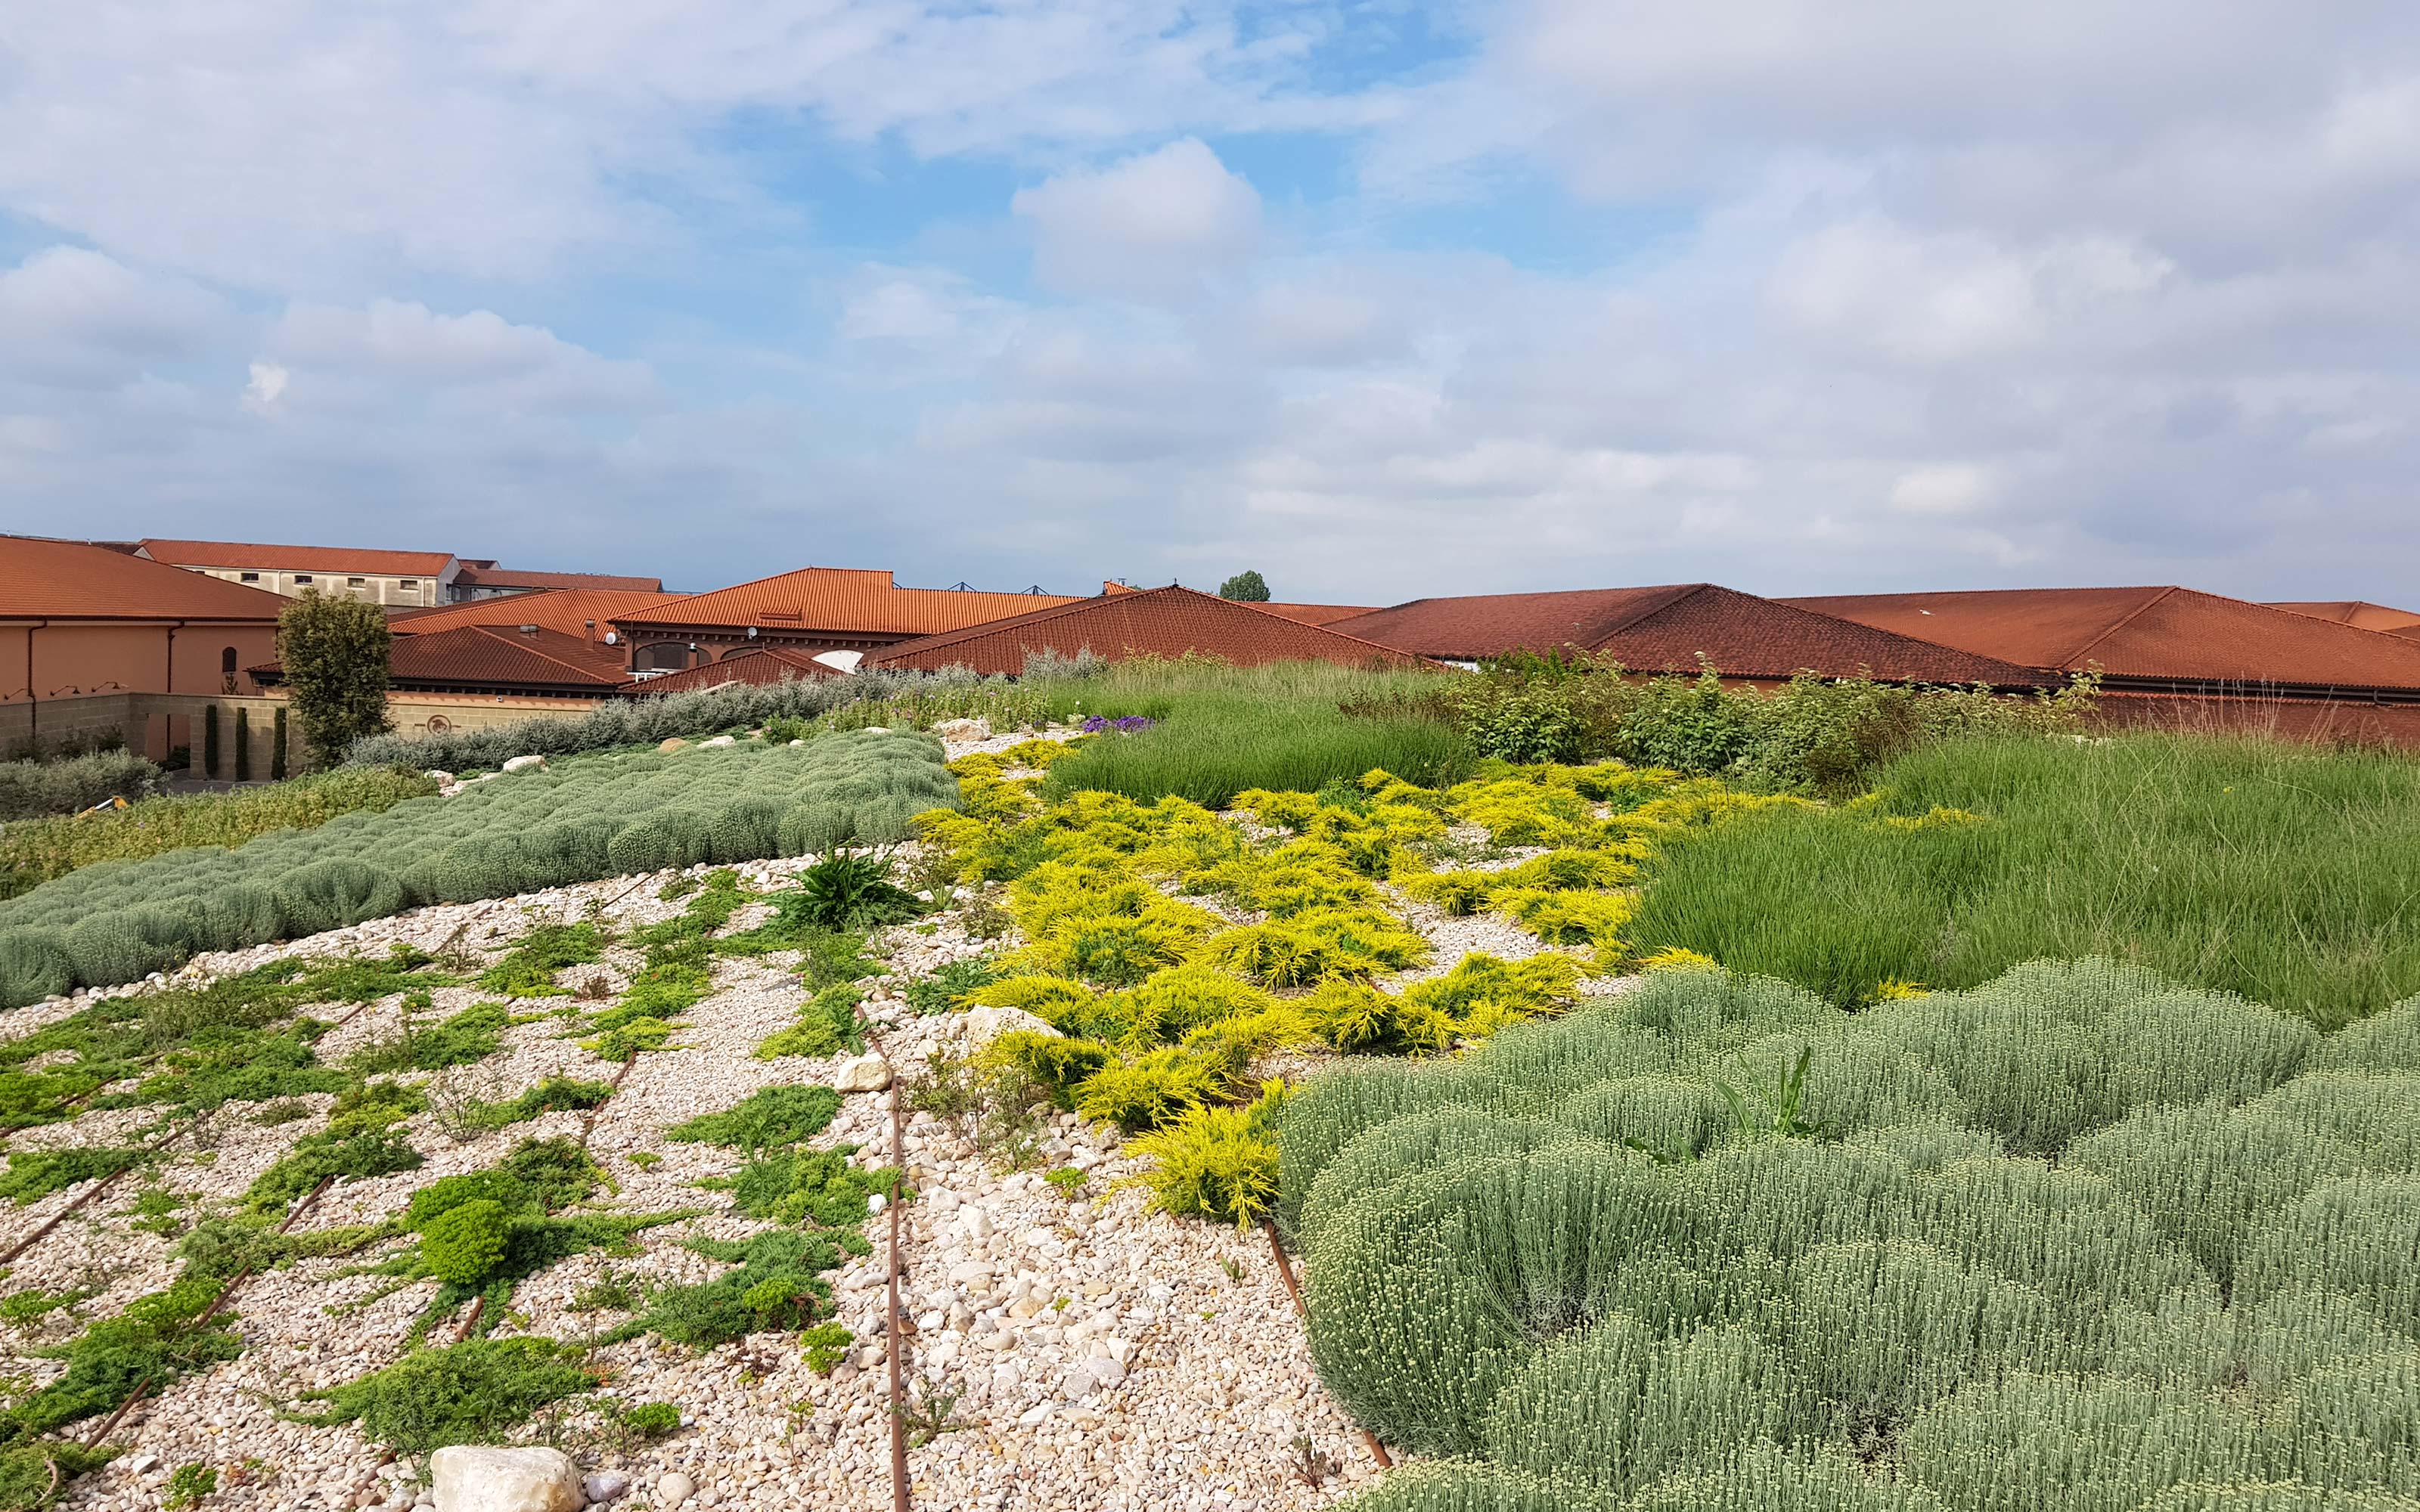 Pitched green roof with mediterranean vegetation